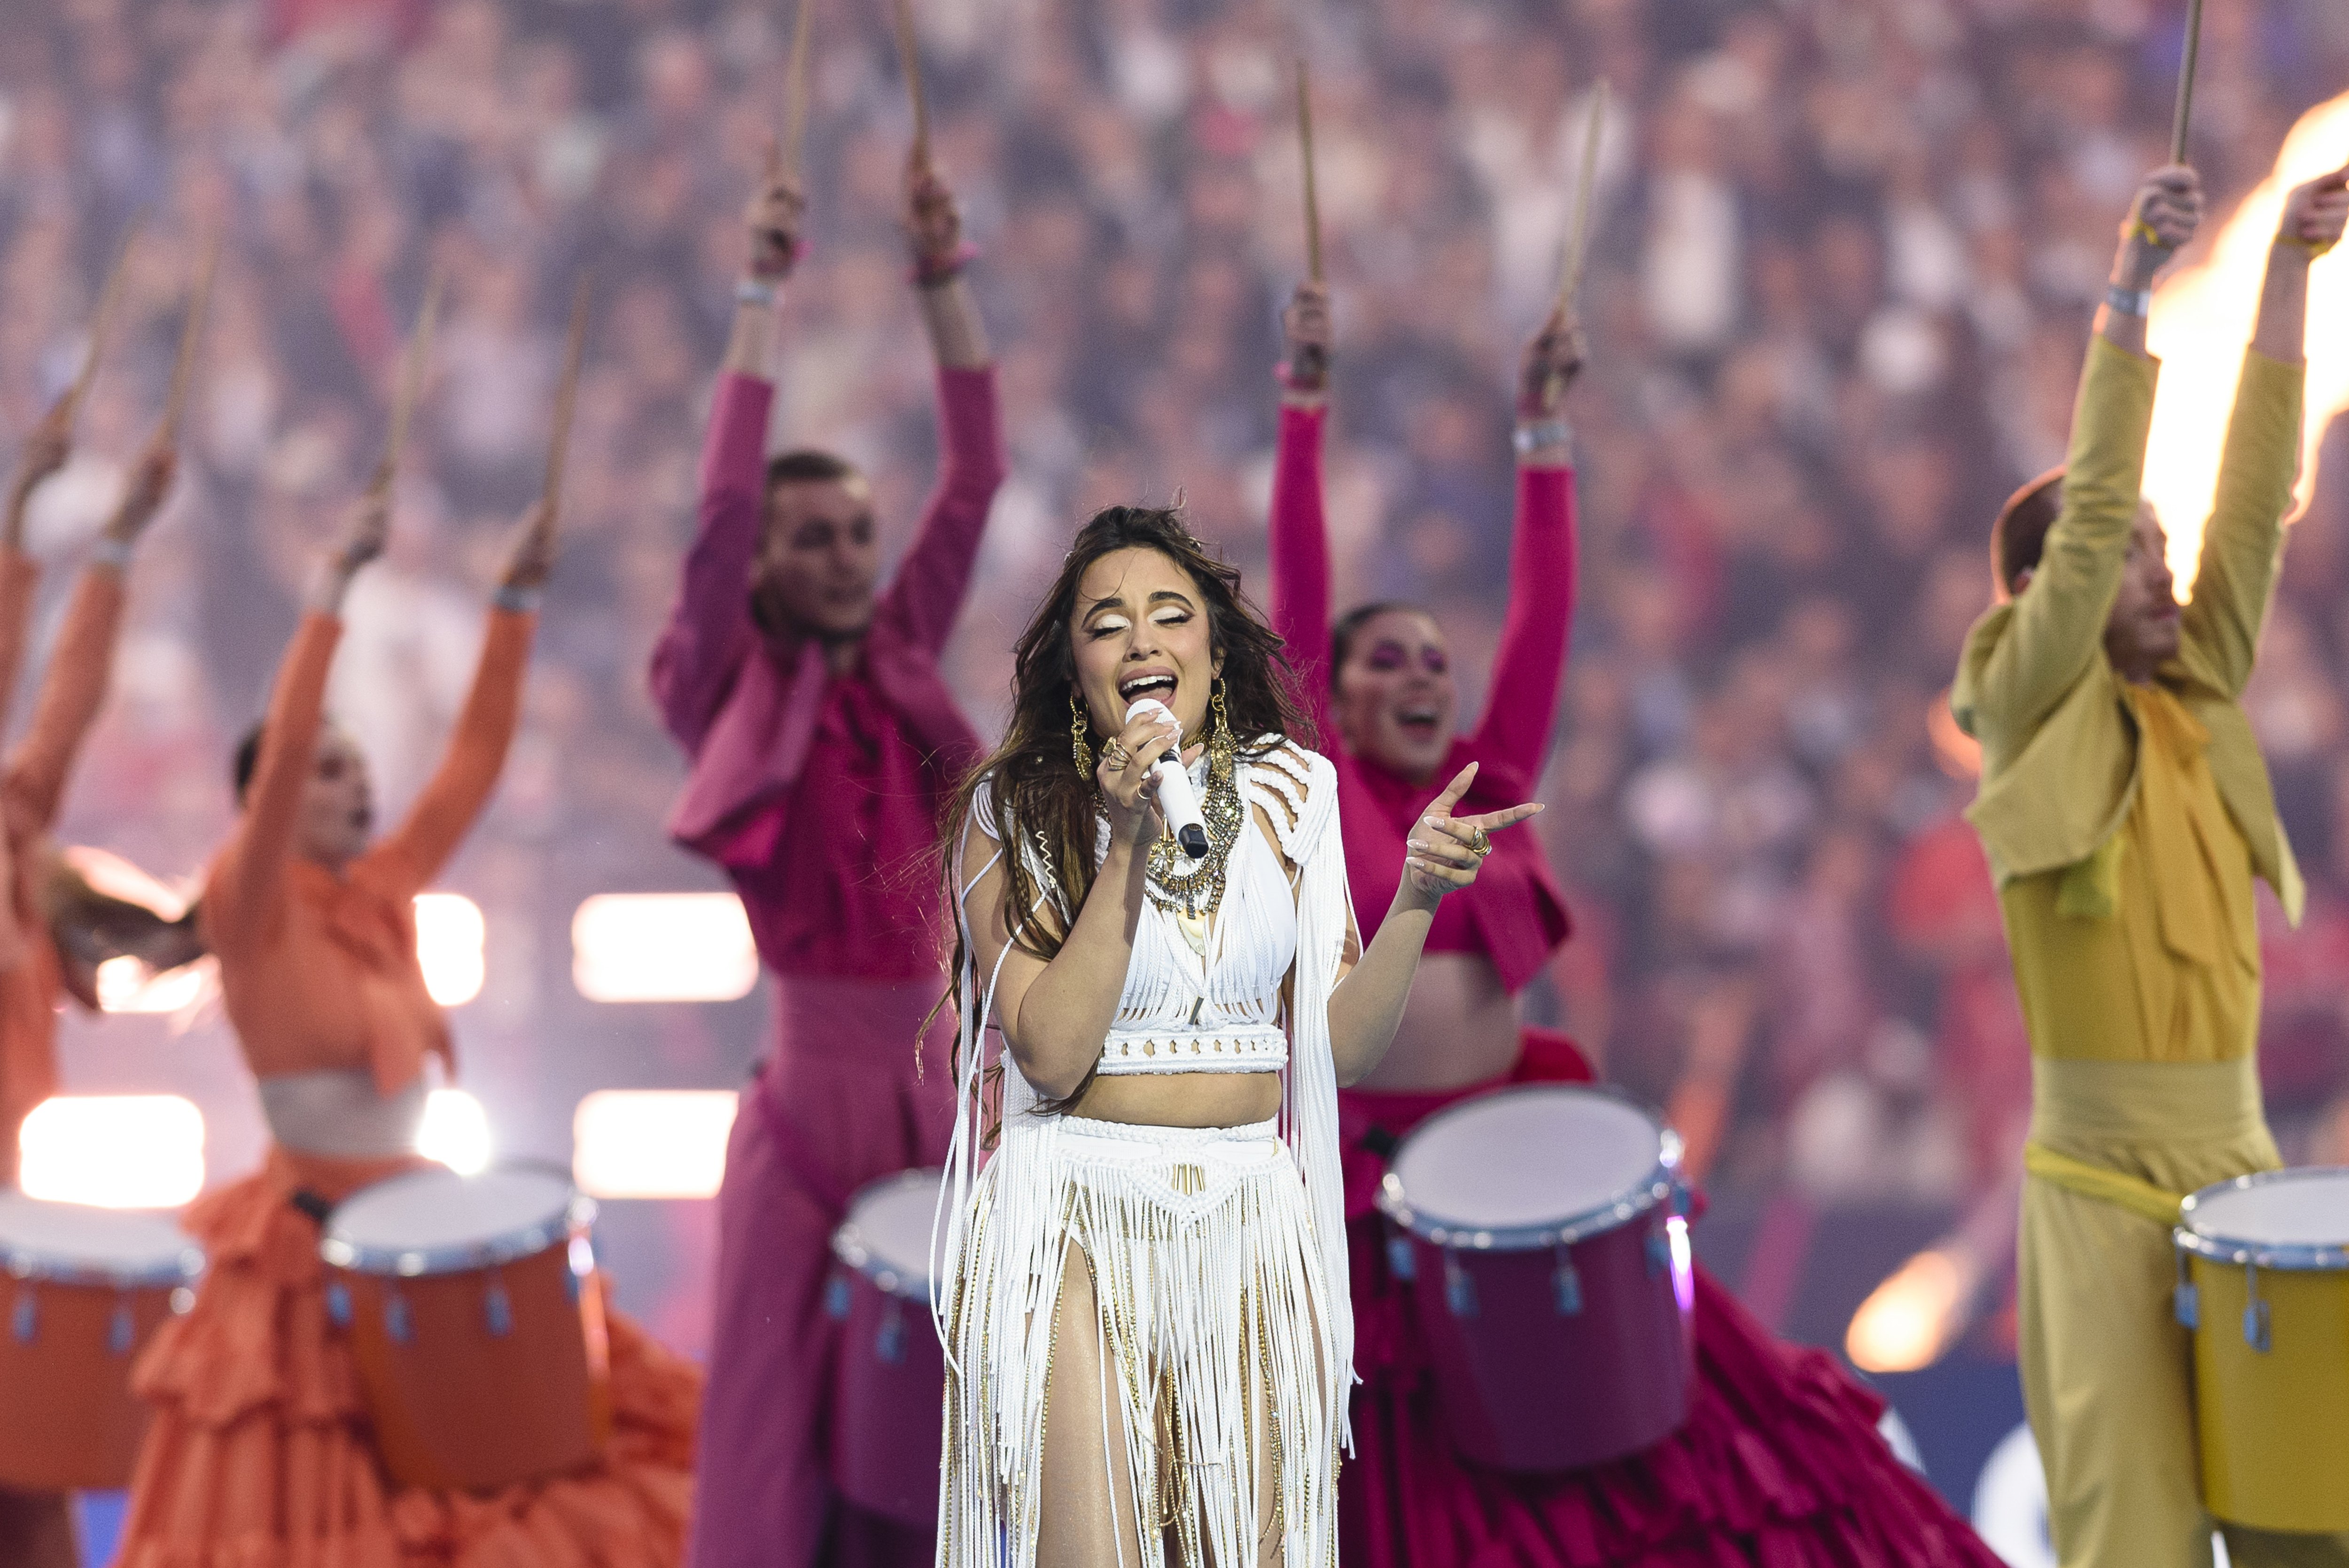 Camila Cabello performs at the UEFA Champions League final match on May 28, 2022 | Source: Getty Images